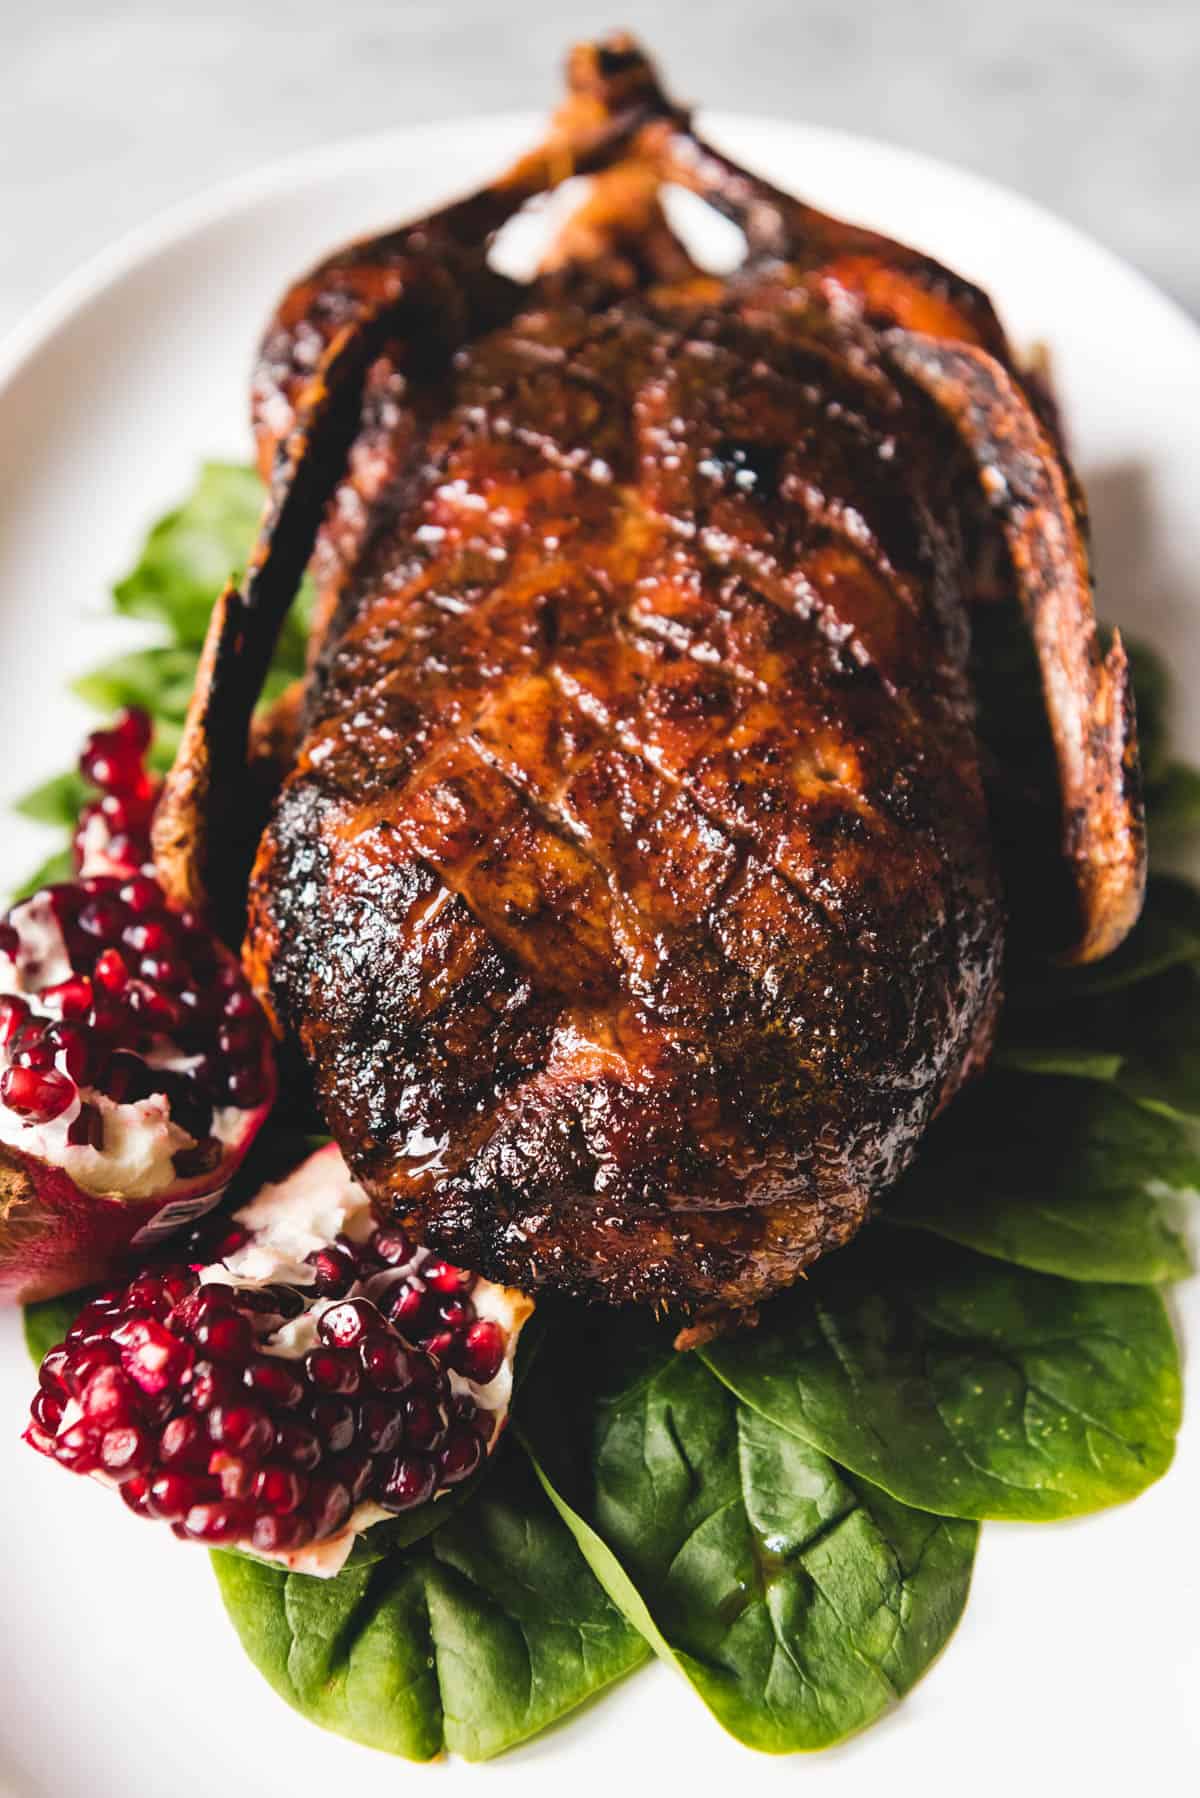 An image of a Honey roasted duck on a bed of spinach with a broken open pomegranate to the side.